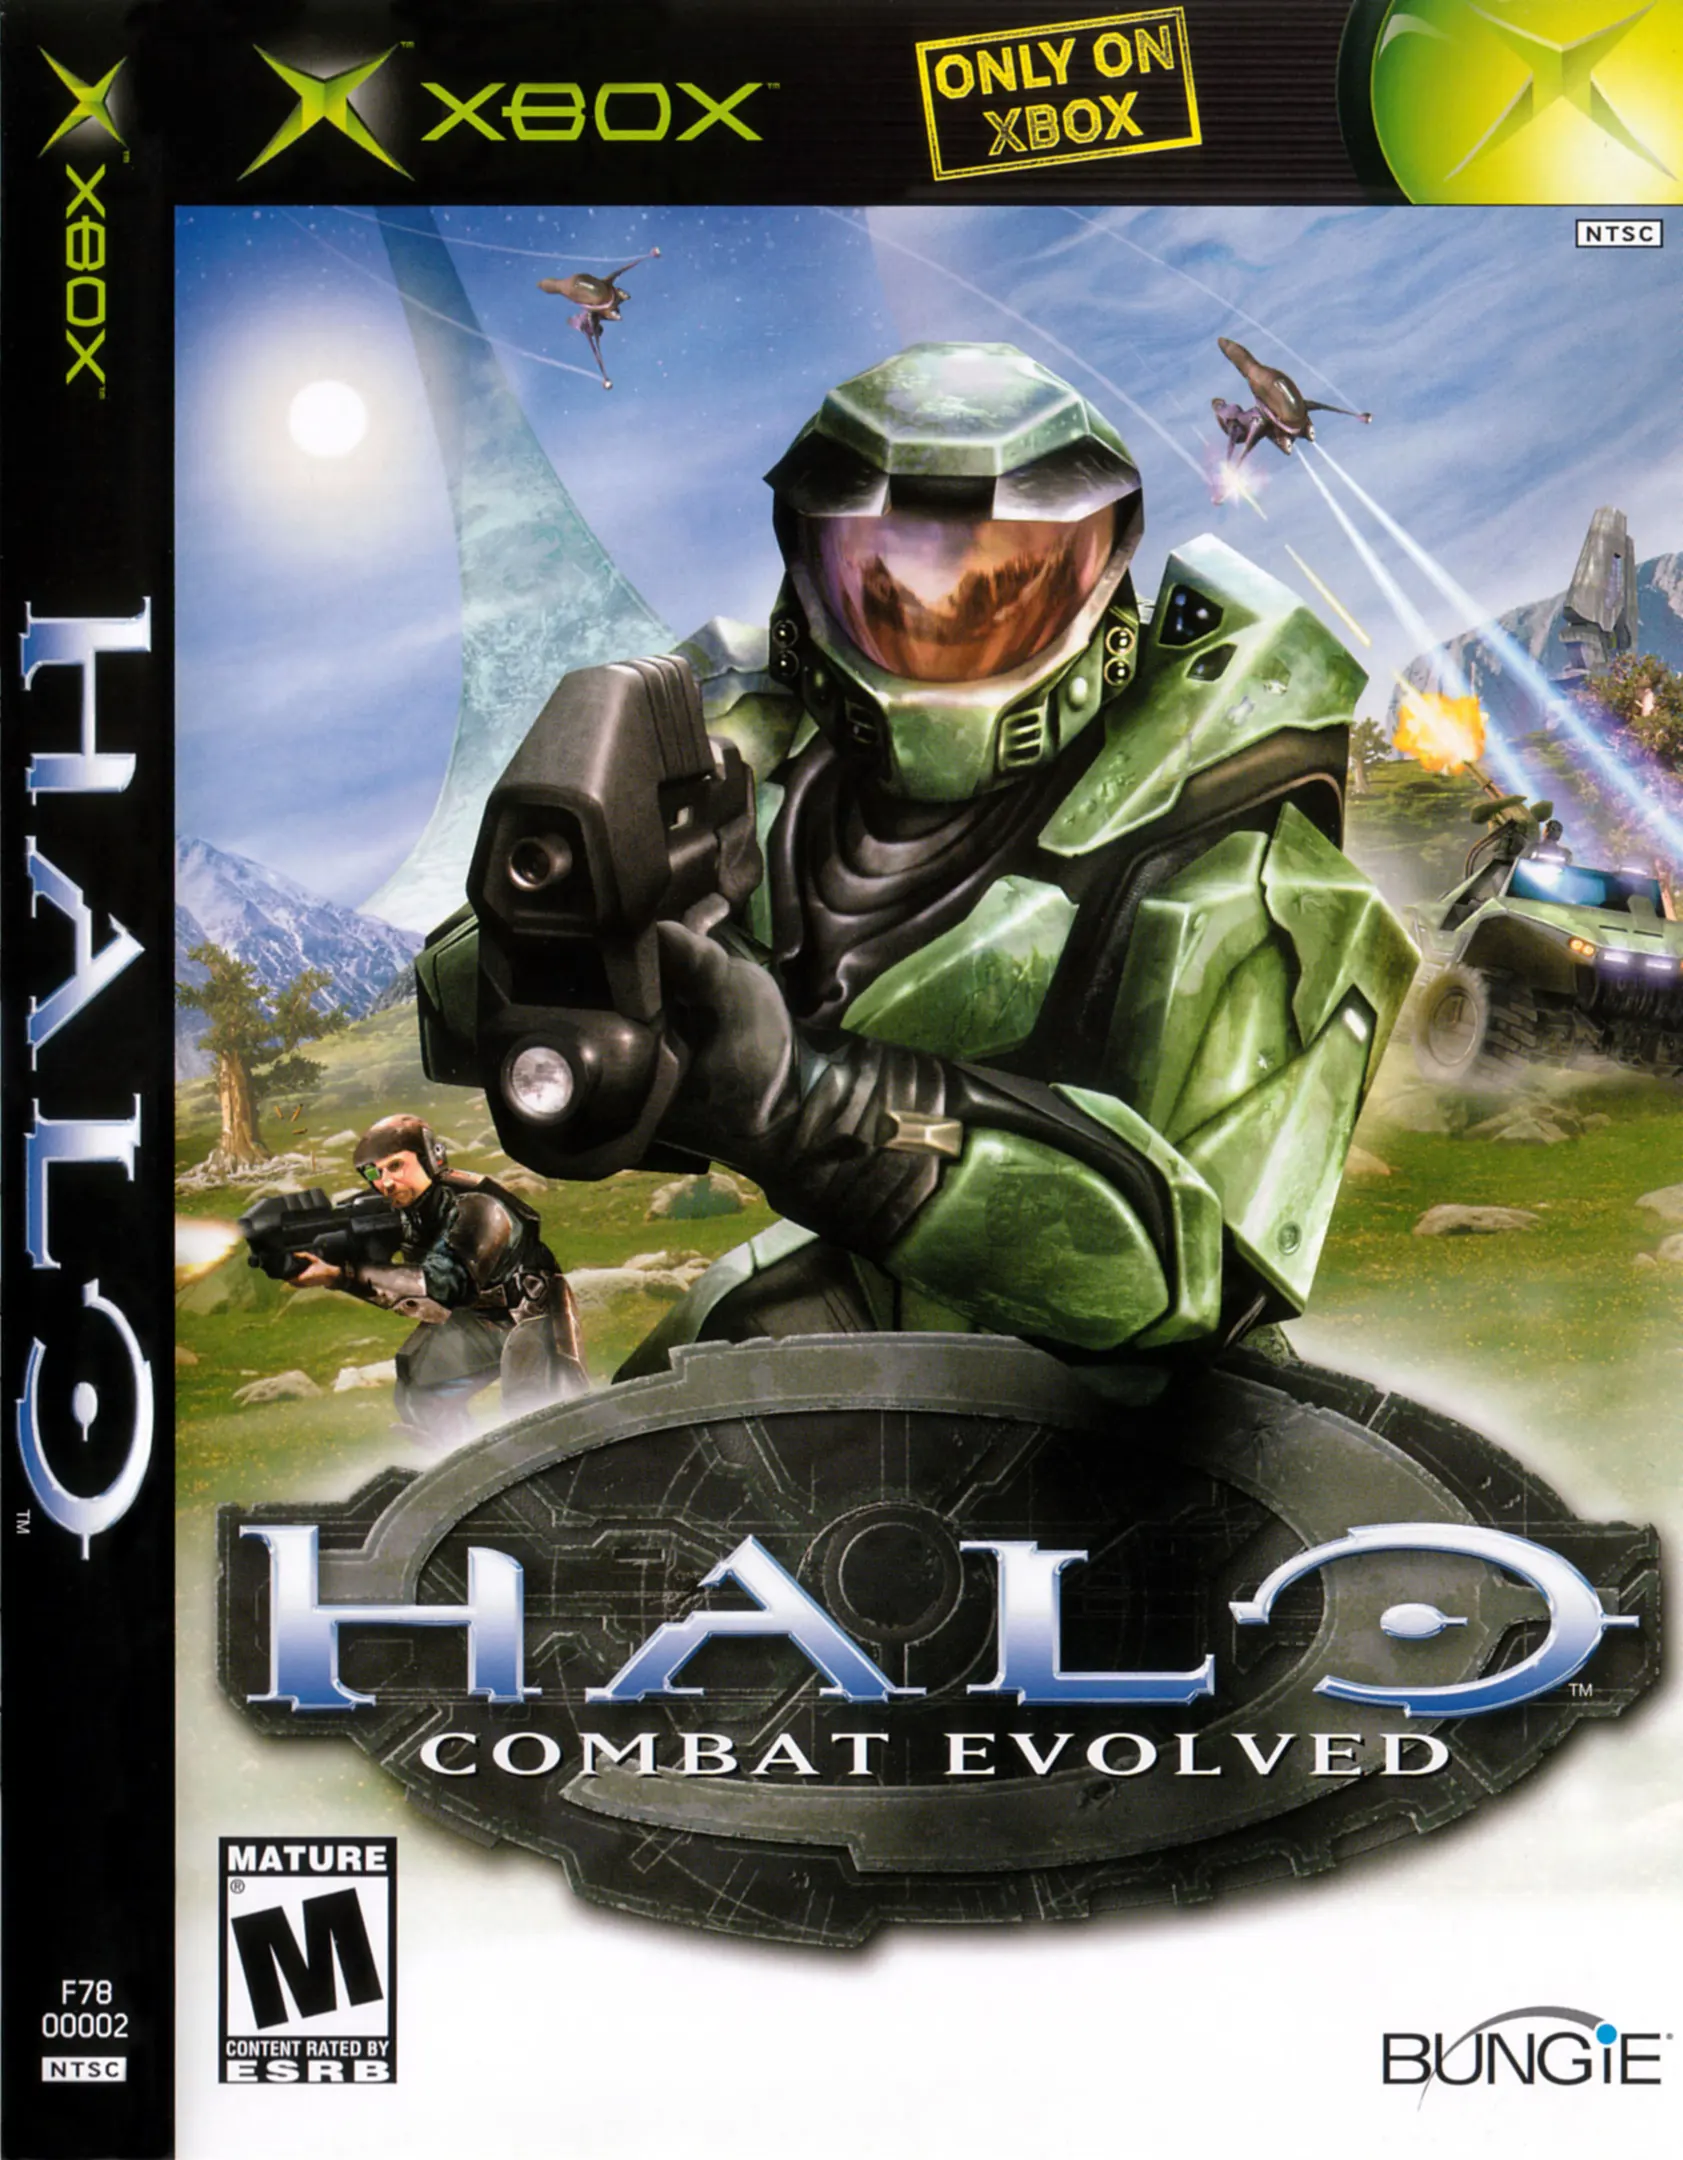 Original Xbox Game Console Halo: Combat Evolved game box front.